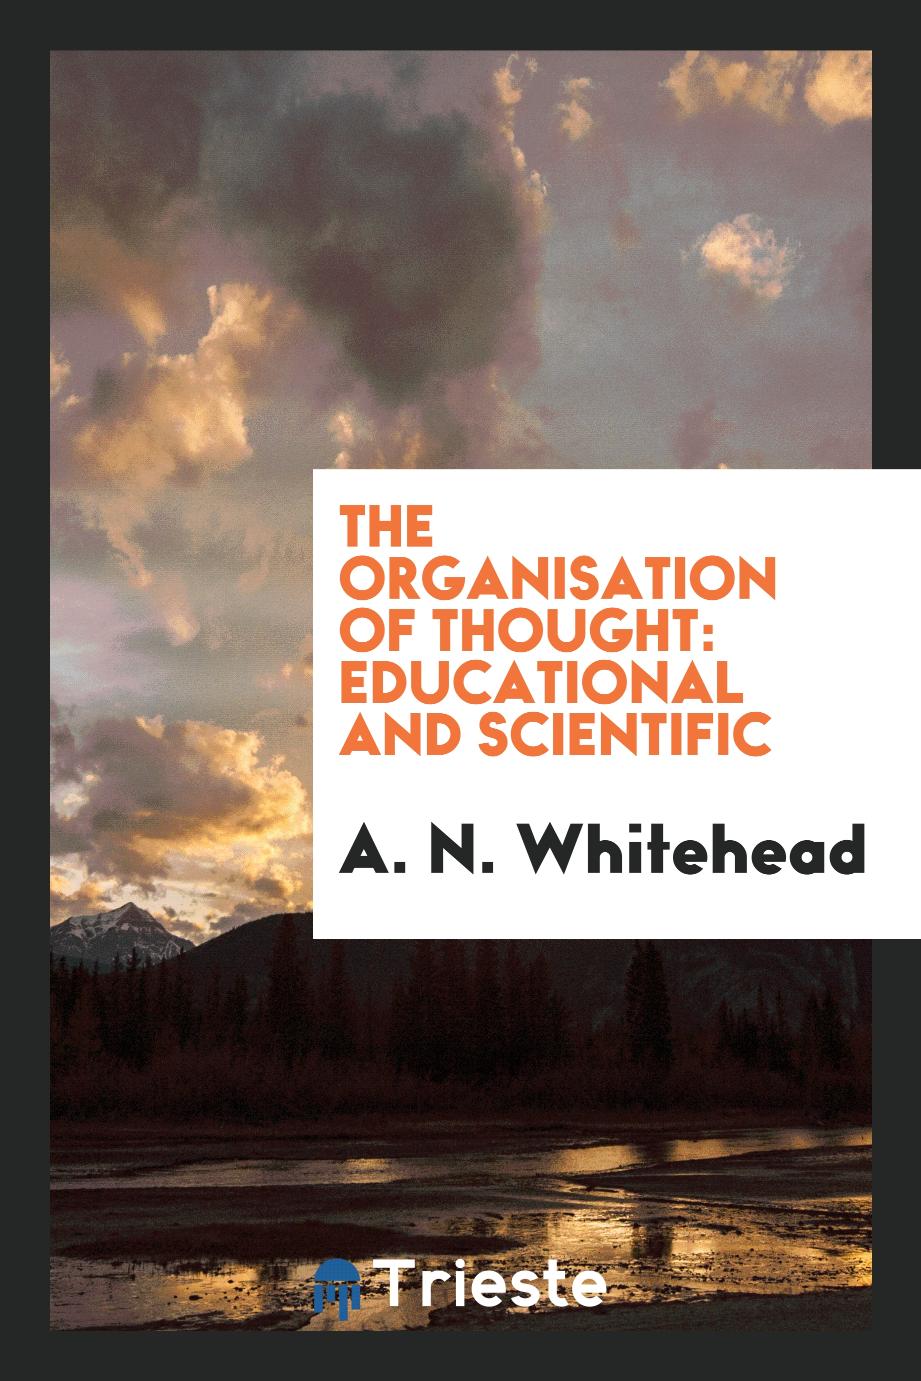 The organisation of thought: educational and scientific